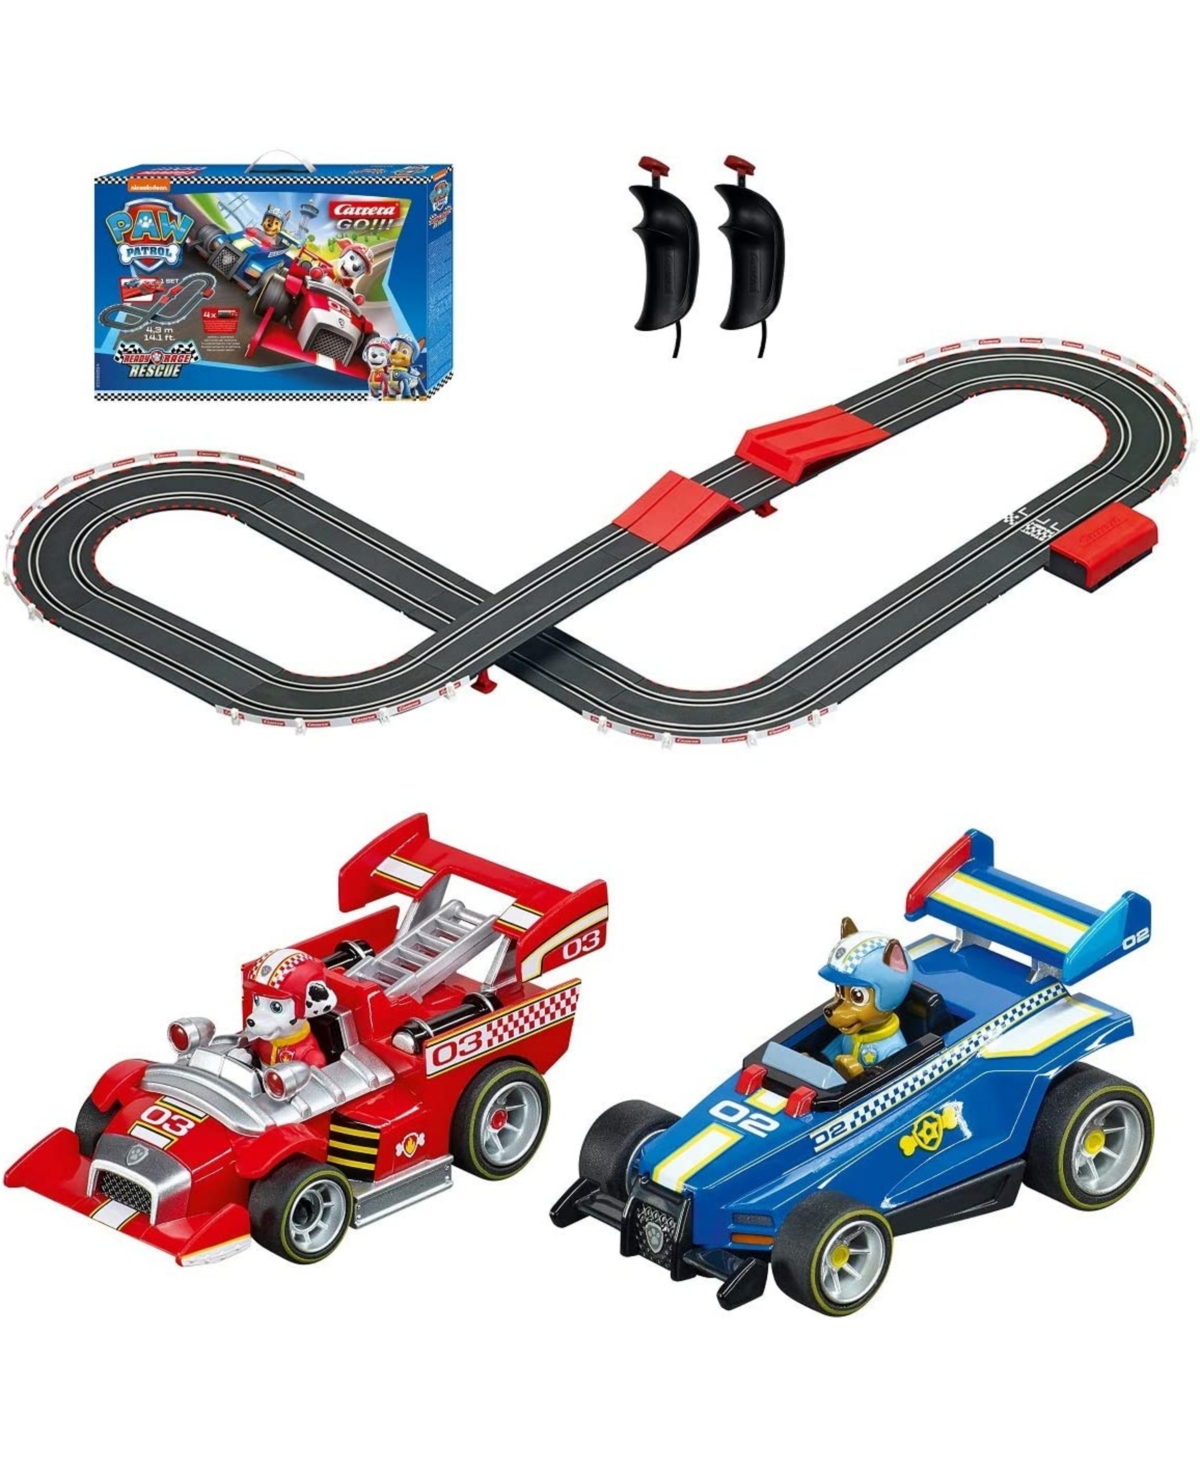 Carrera Official Paw Patrol Battery Operated 1:43 Scale Slot Car Racing Jump Ramp Toy Track Set In No Color